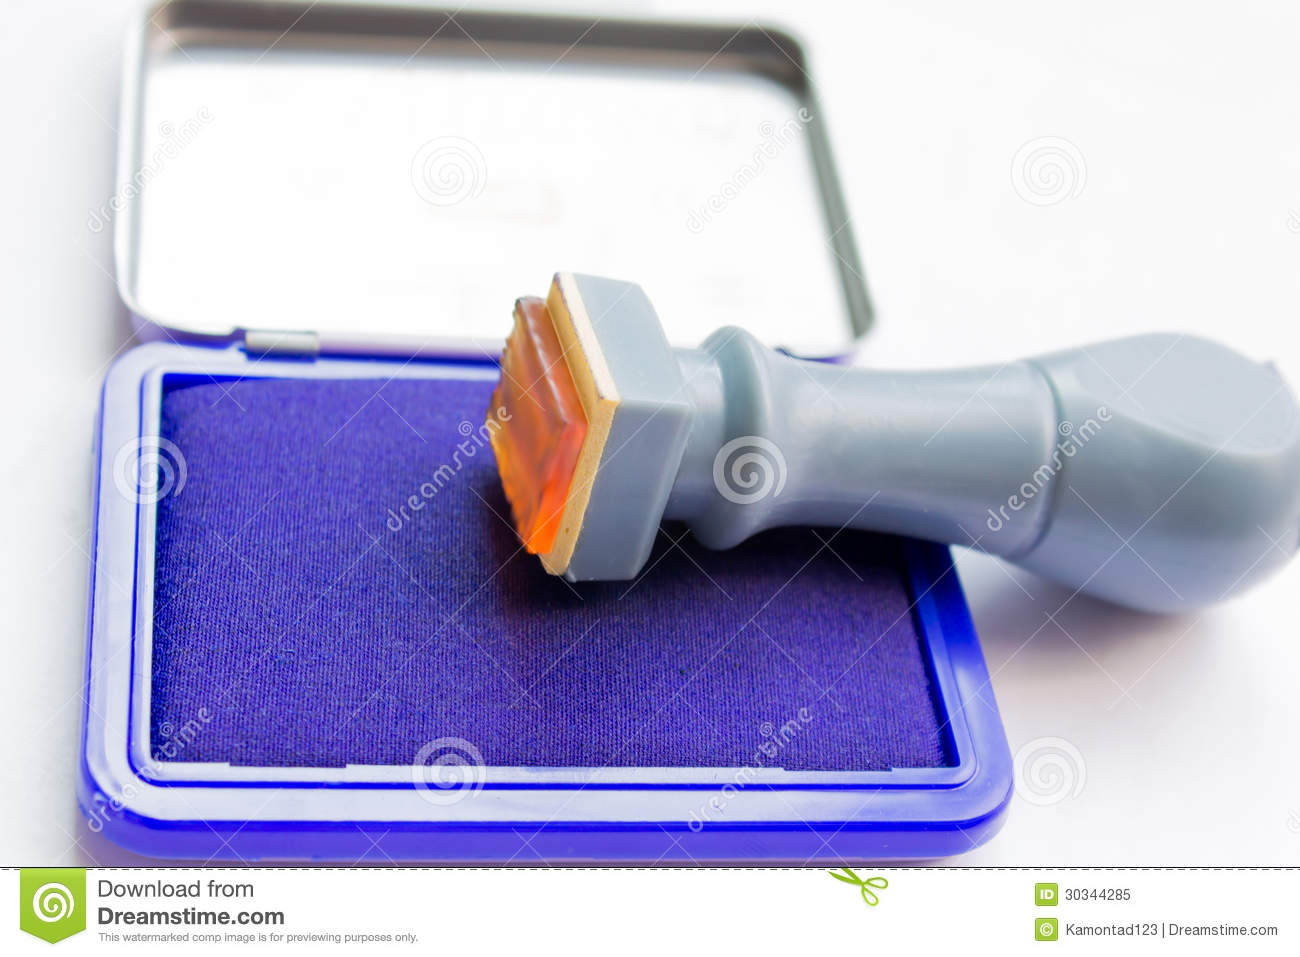 Rubber Stamp With Stamp Pad Royalty Free Stock Photo   Image  30344285